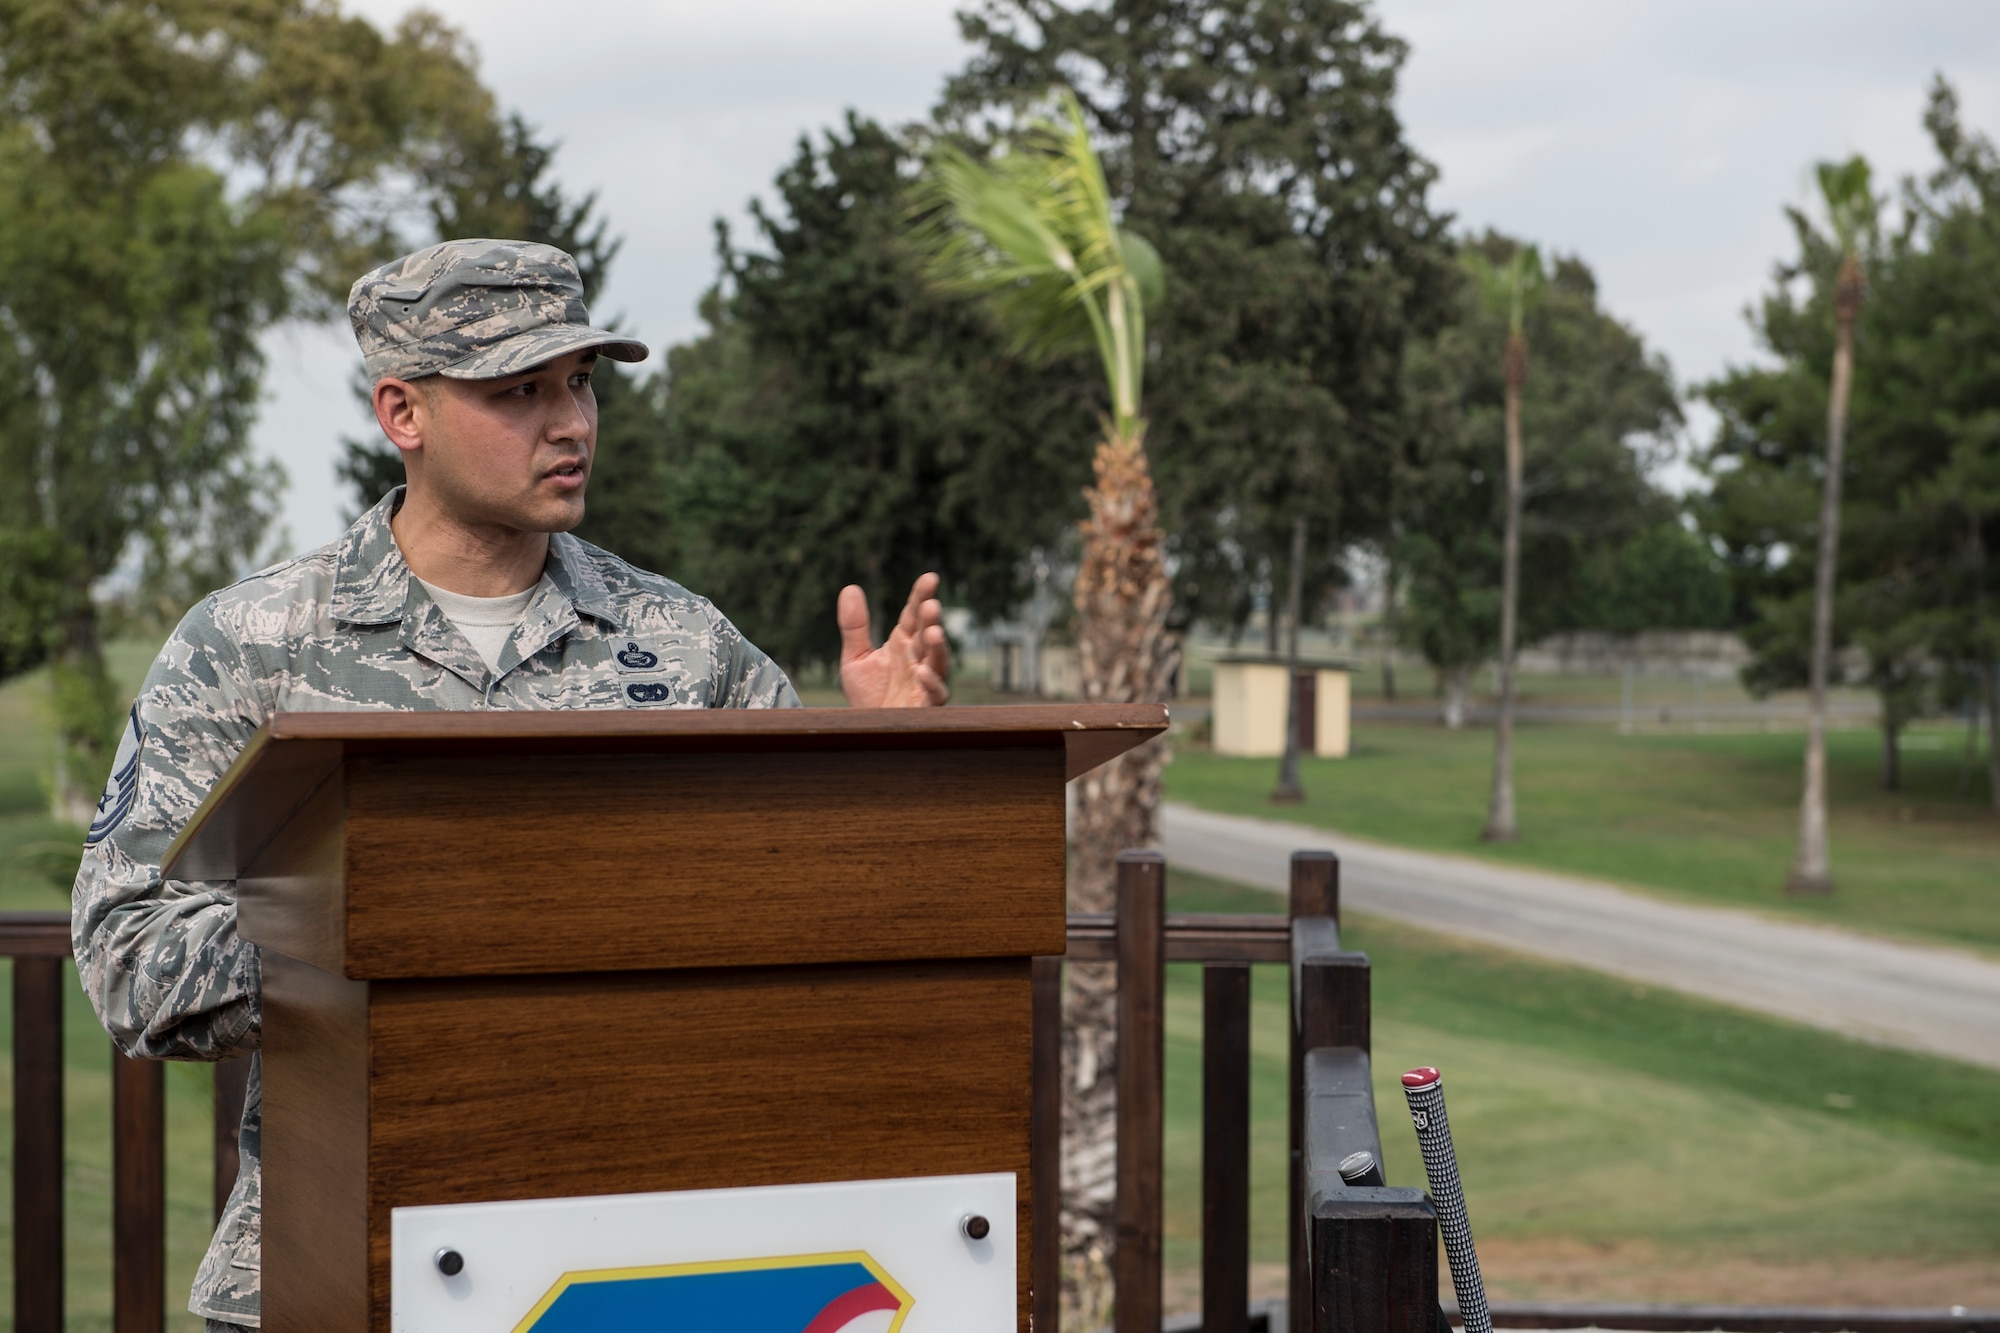 Master Sgt. Speaks during a ceremony.